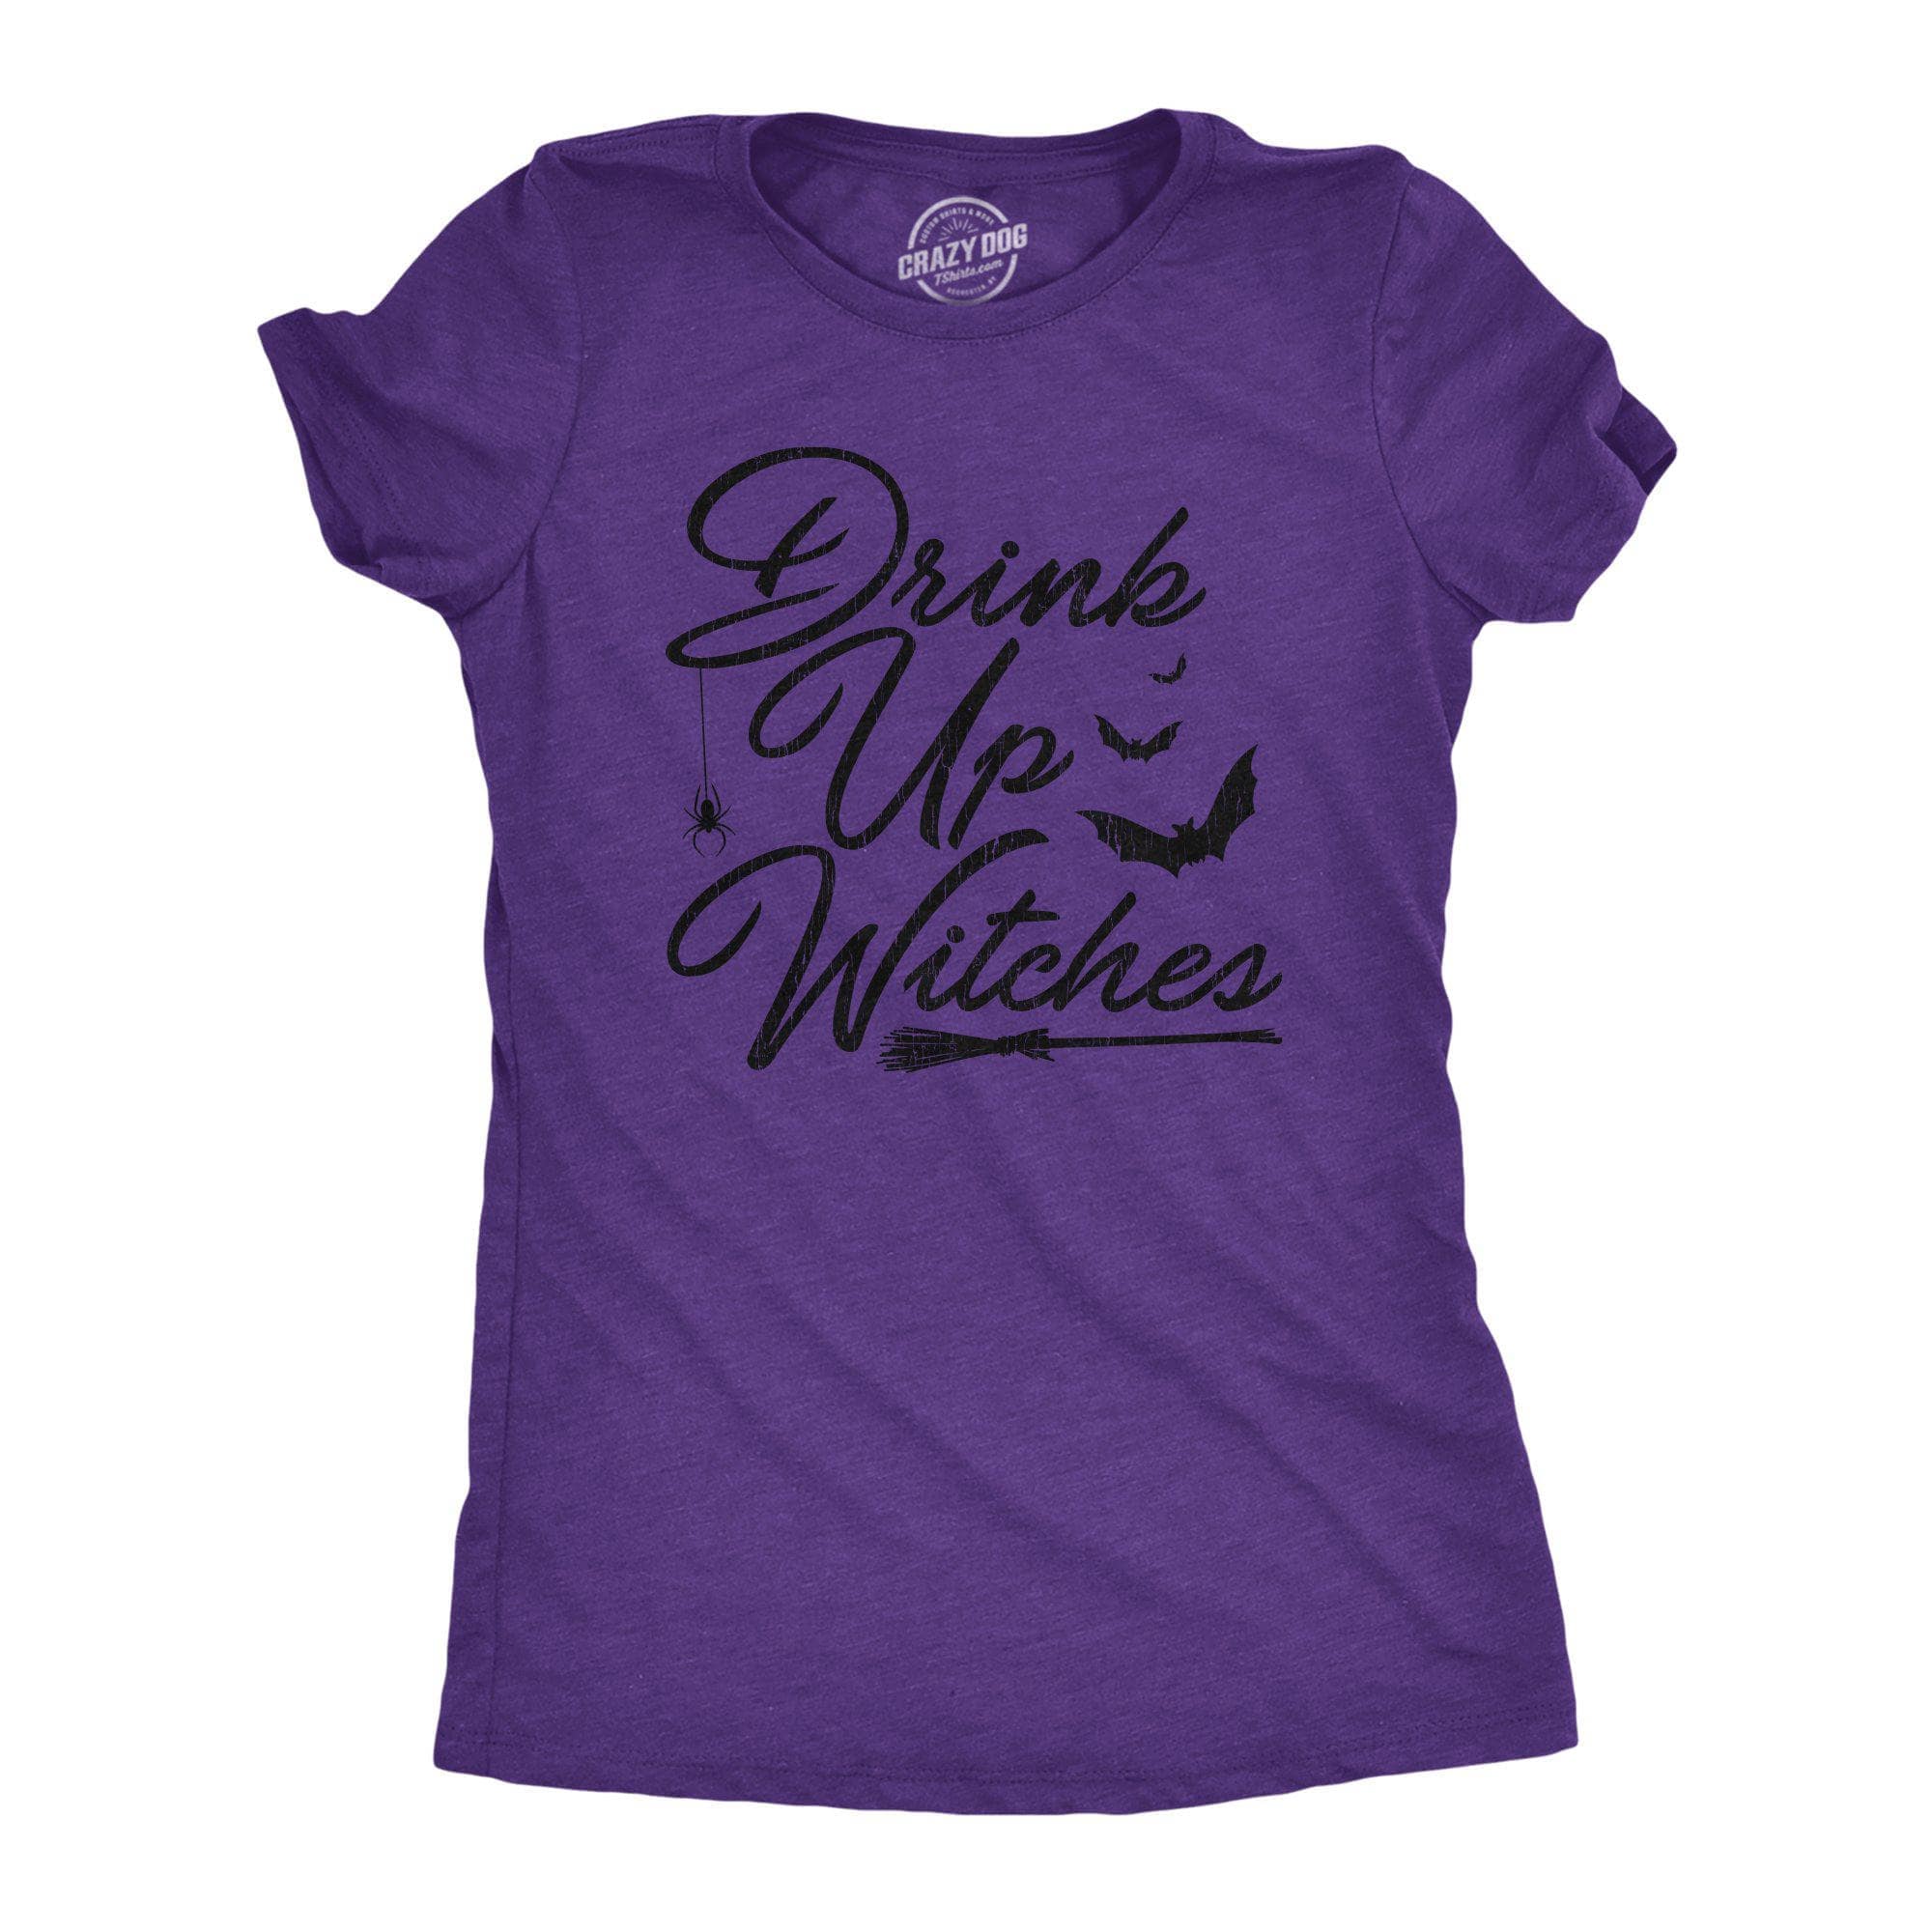 Drink Up Witches Women's Tshirt - Crazy Dog T-Shirts